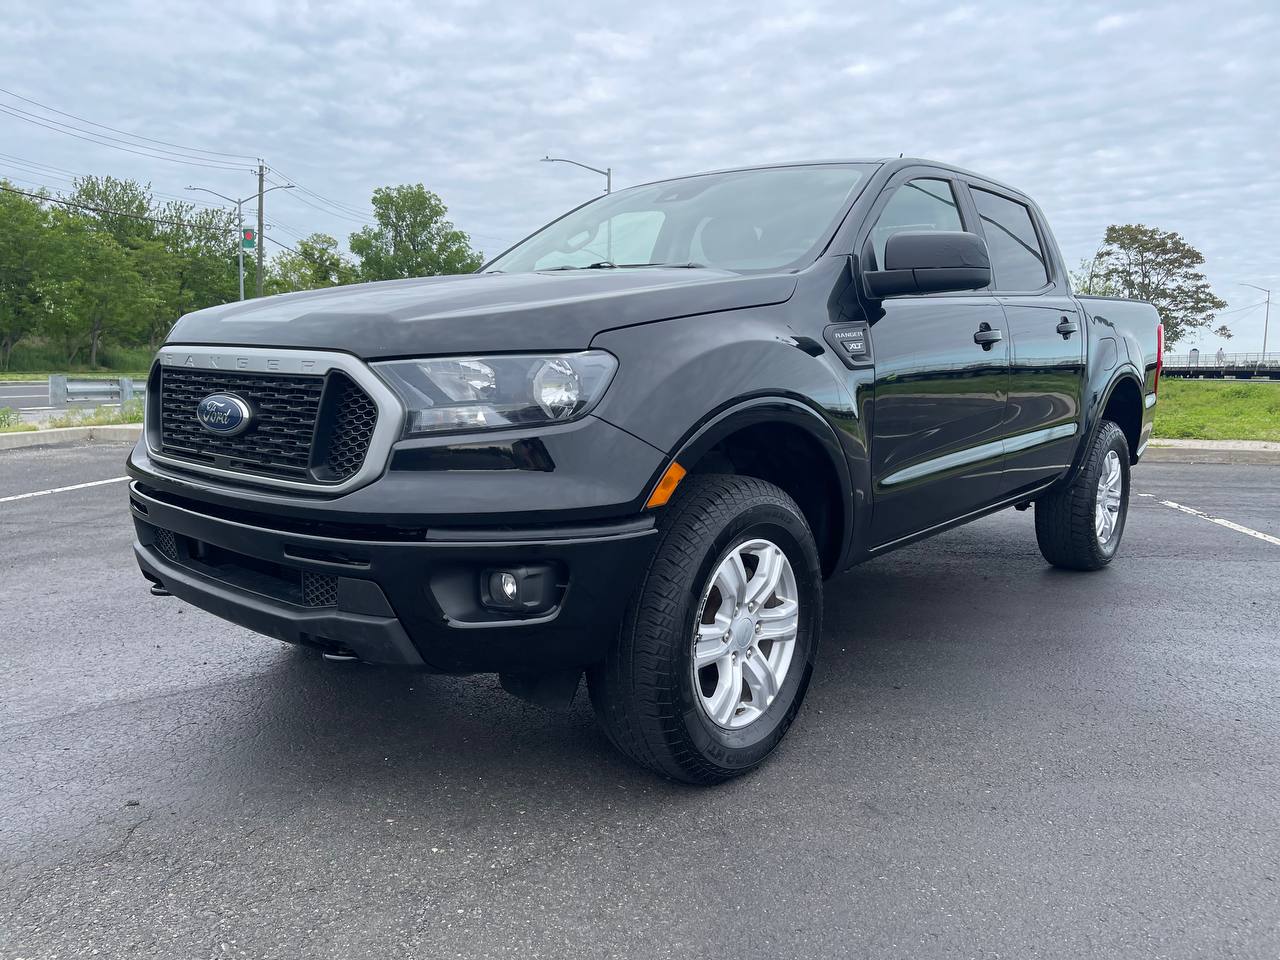 Used Car - 2020 Ford Ranger XLT 4x4 for Sale in Staten Island, NY